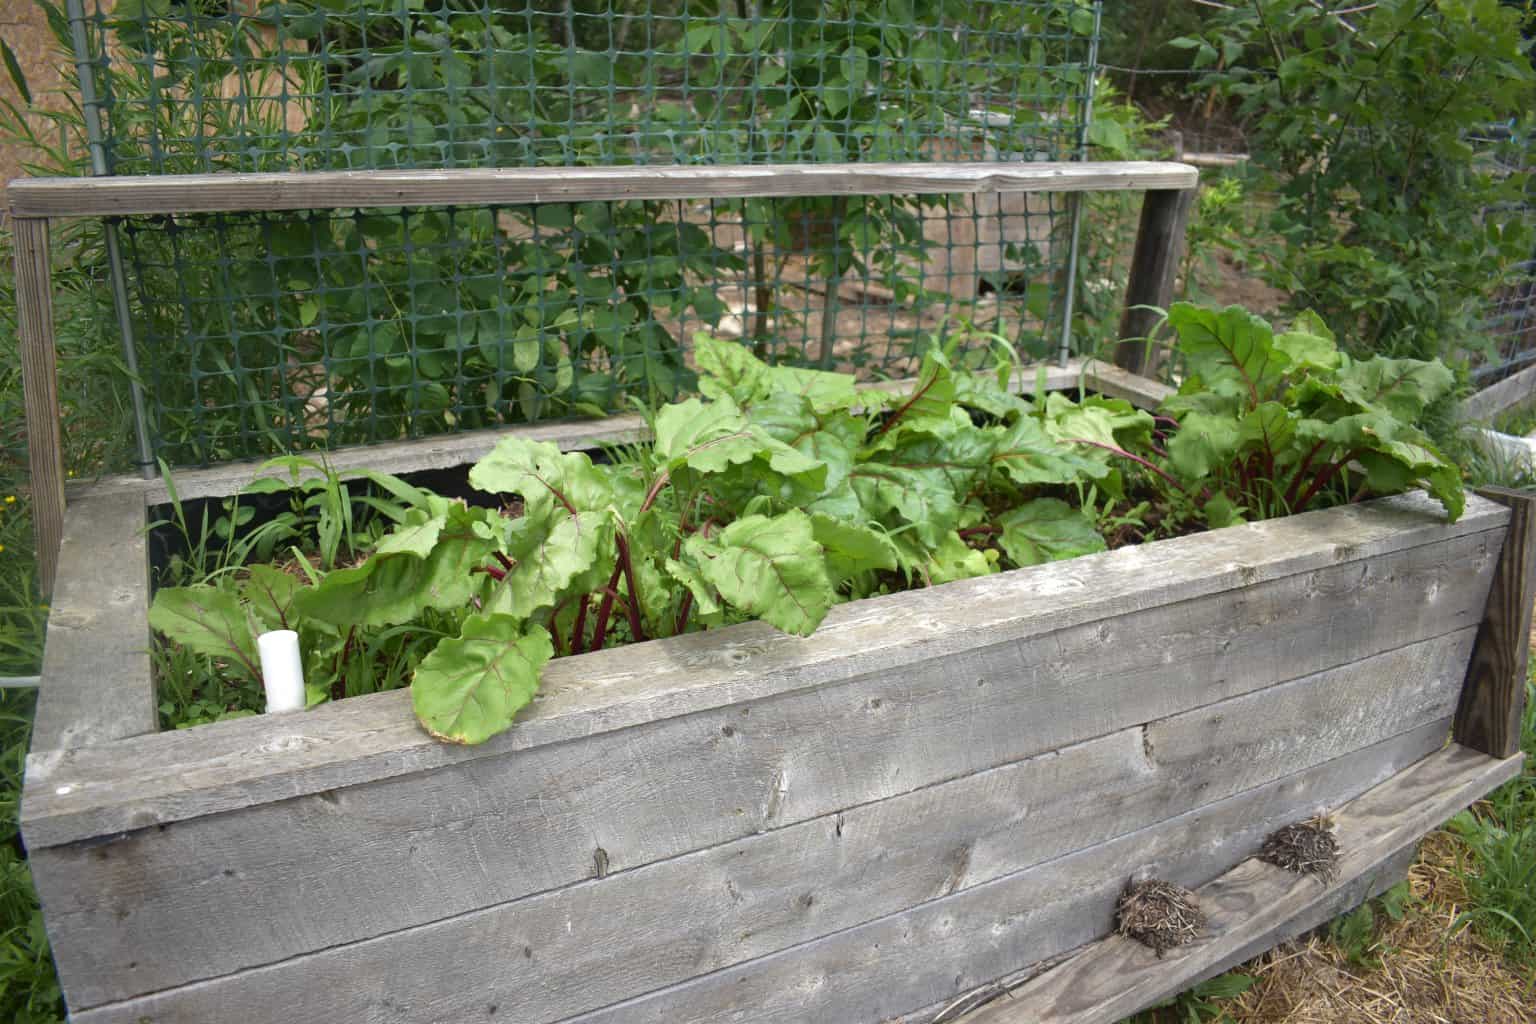 beets growing in wooden raised bed